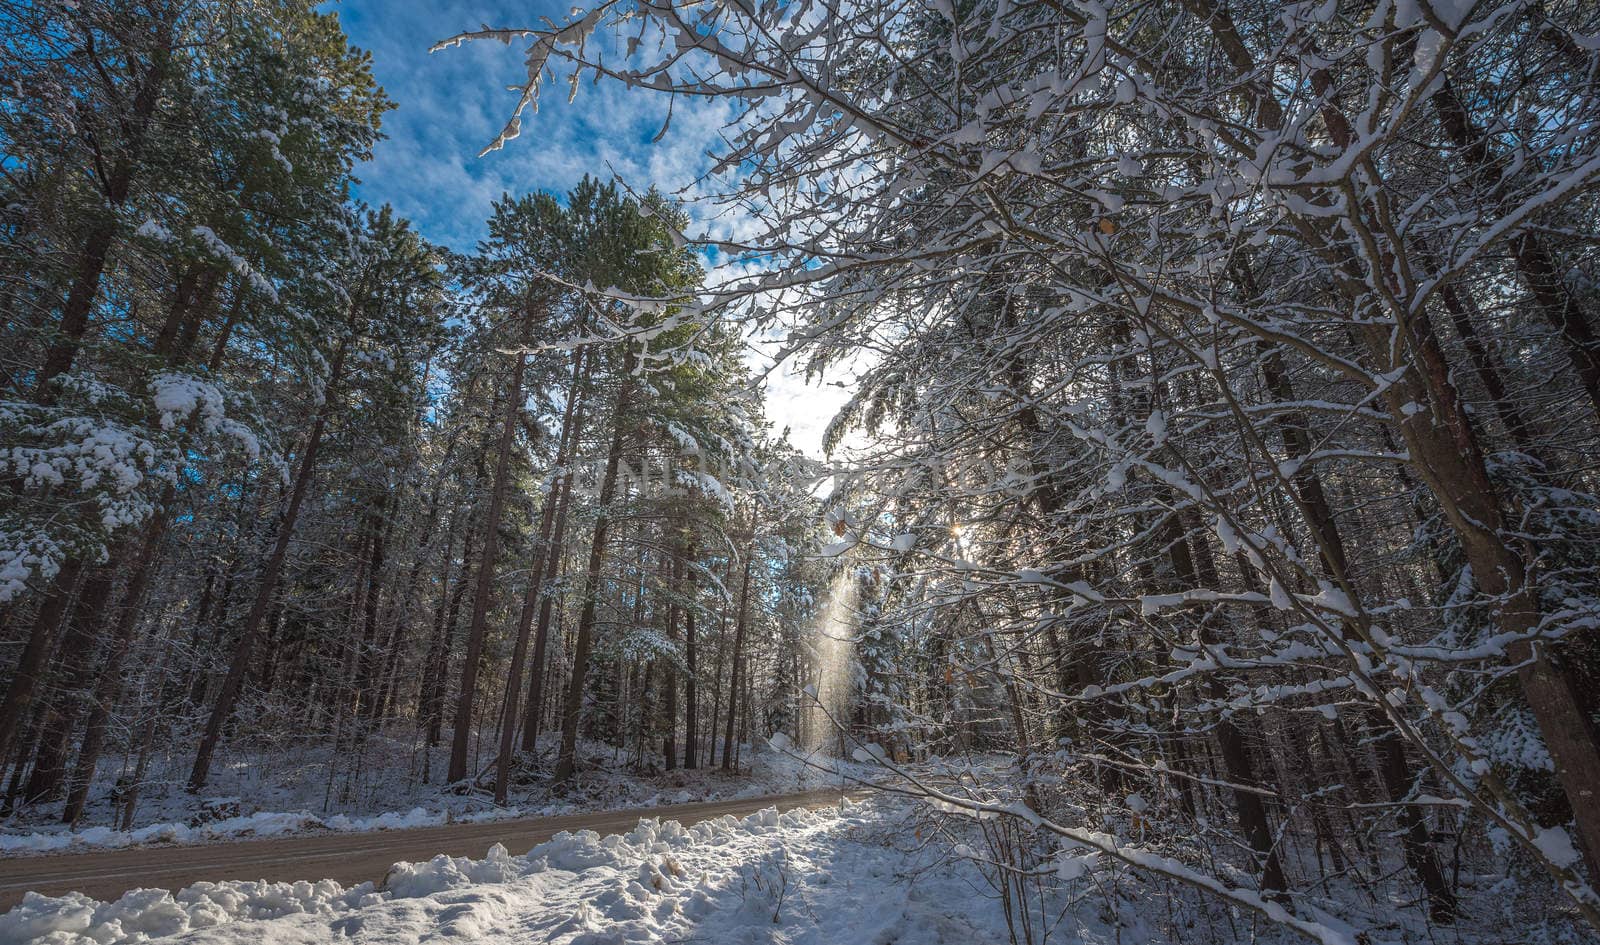 Snow falls from covered pines - beautiful forests along rural roads. by valleyboi63